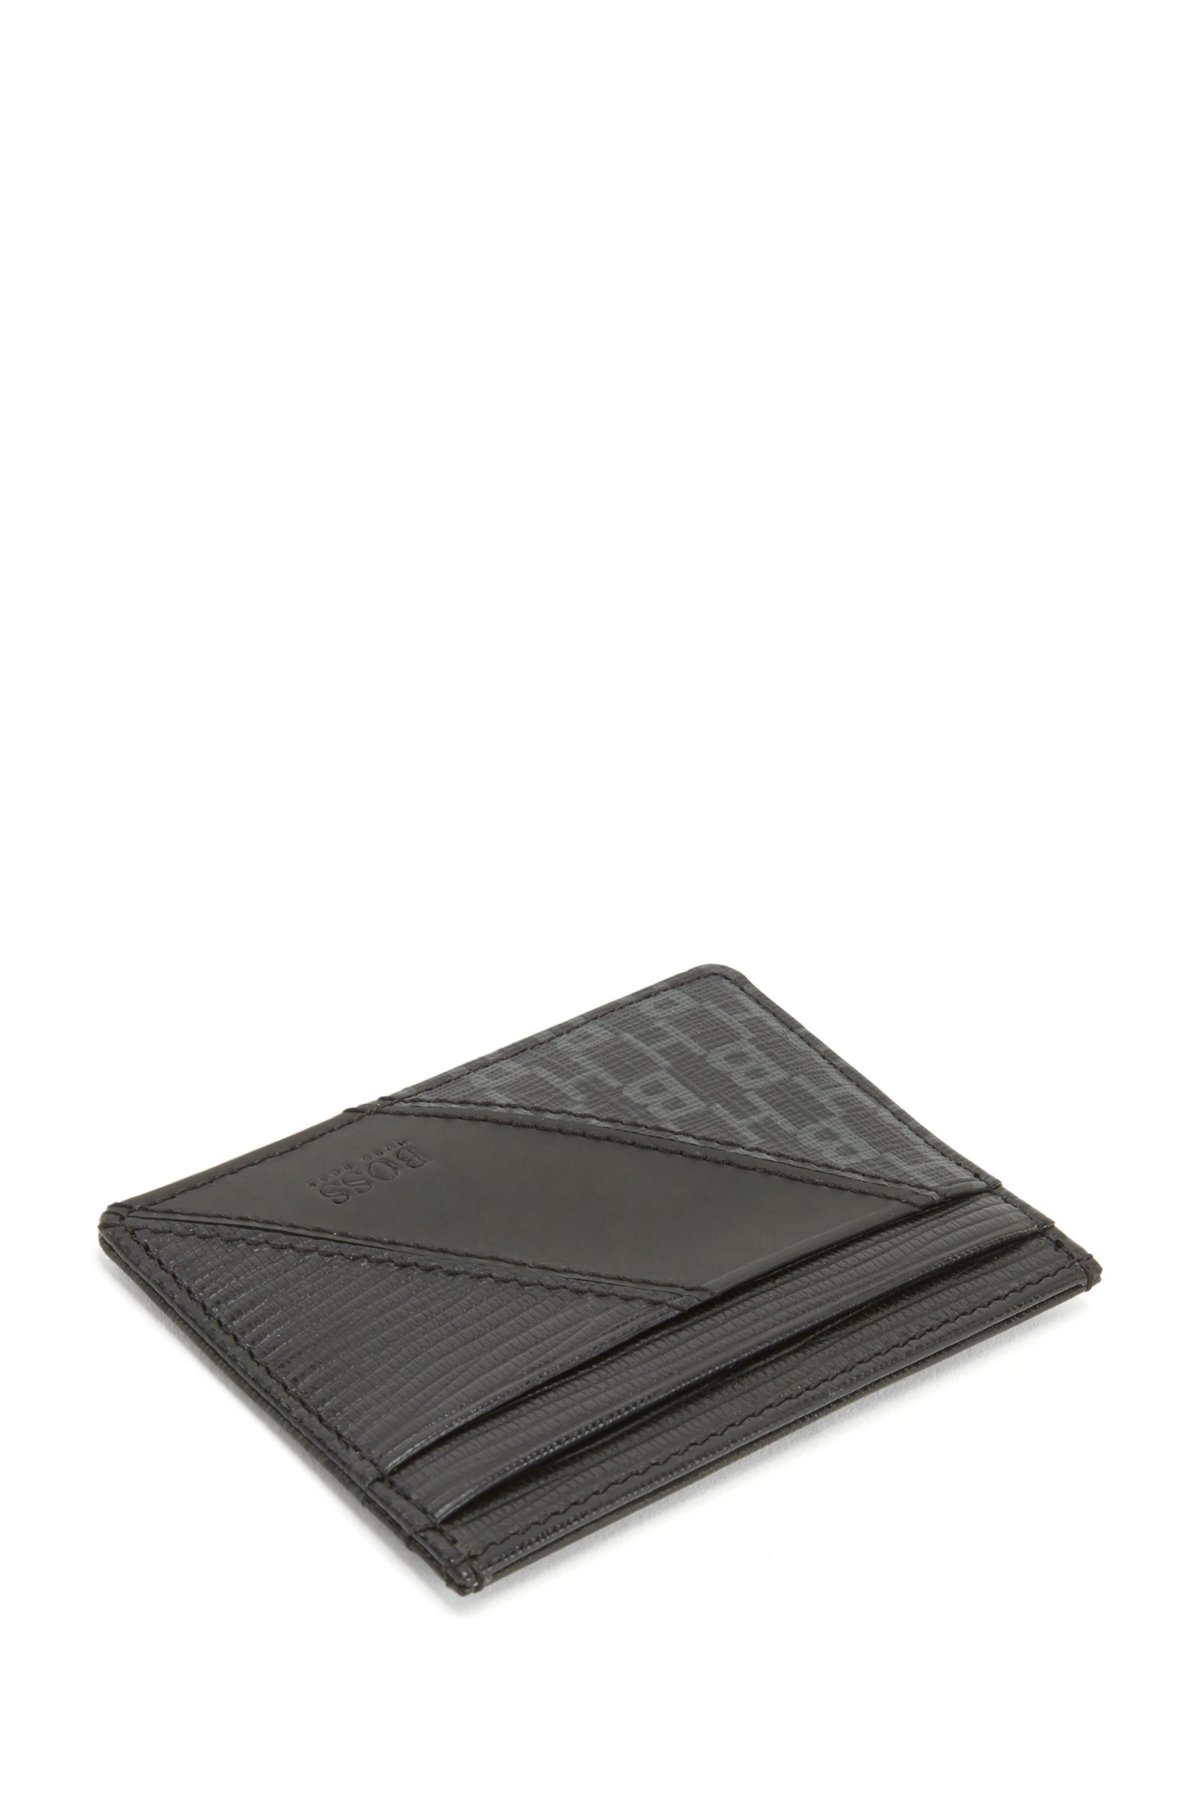 Lacoste Men's Leather Monogram Print Card Holder - One Size